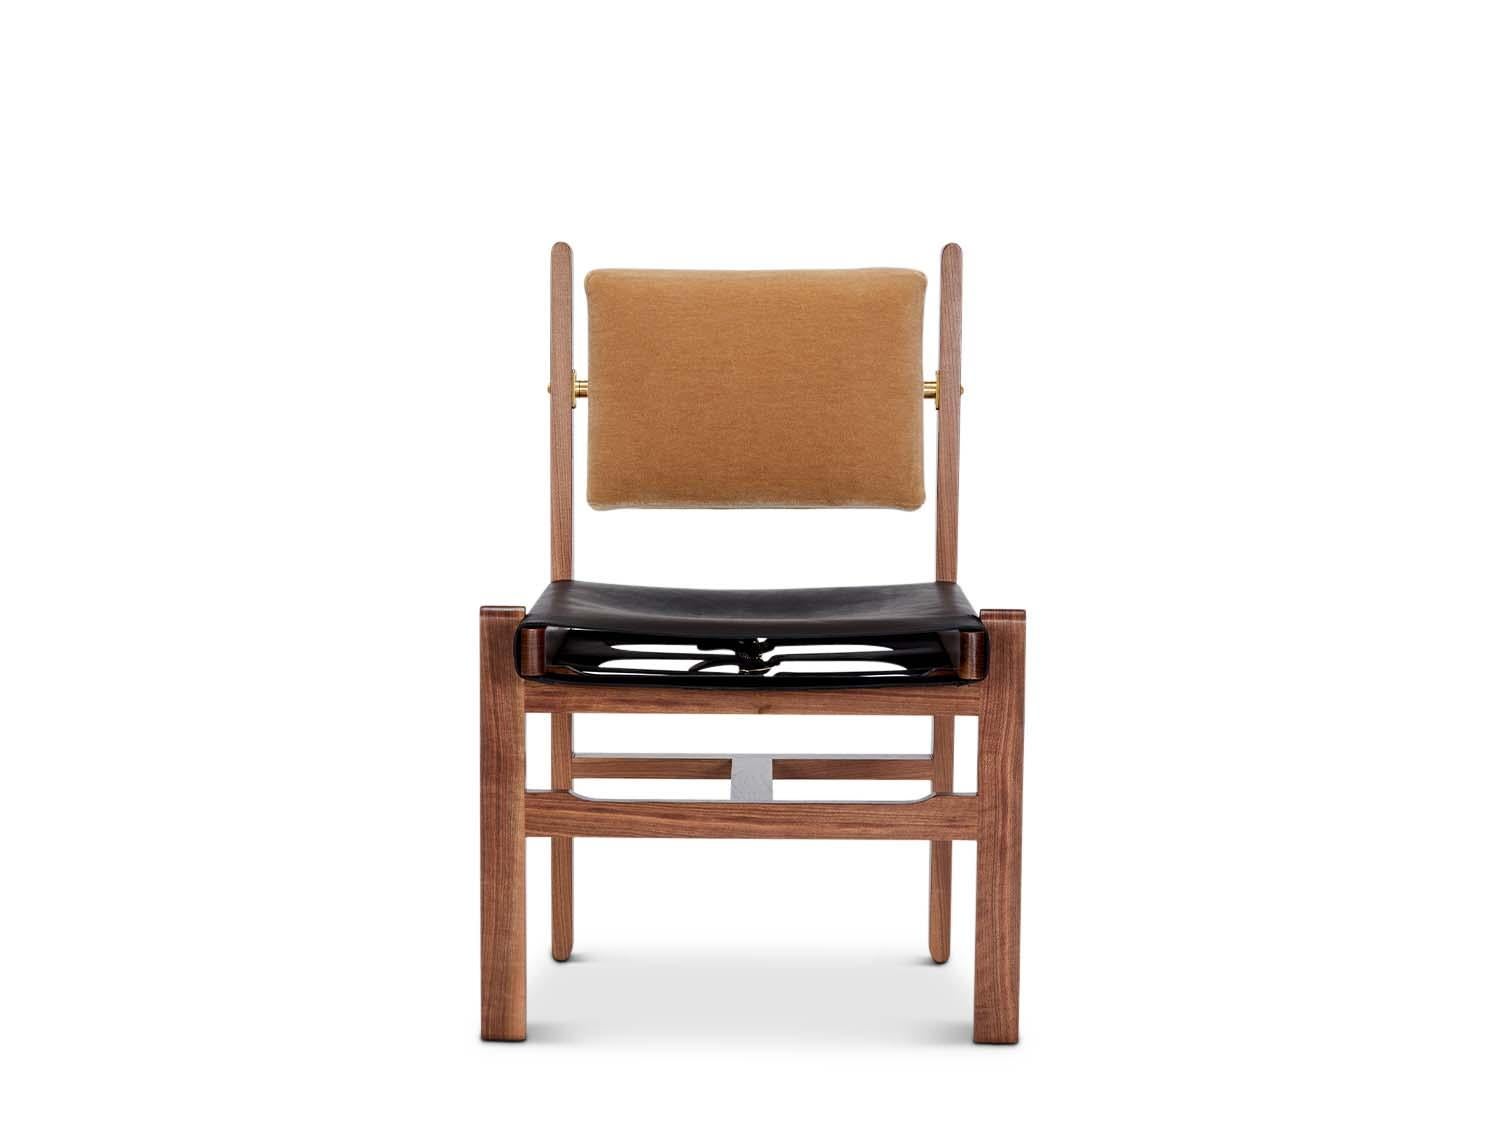 The Morro Dining Side Chair is made from a solid American walnut or white oak frame and features an upholstered back cushion and a leather sling seat.

The Lawson-Fenning Collection is designed and handmade in Los Angeles, California. Reach out to